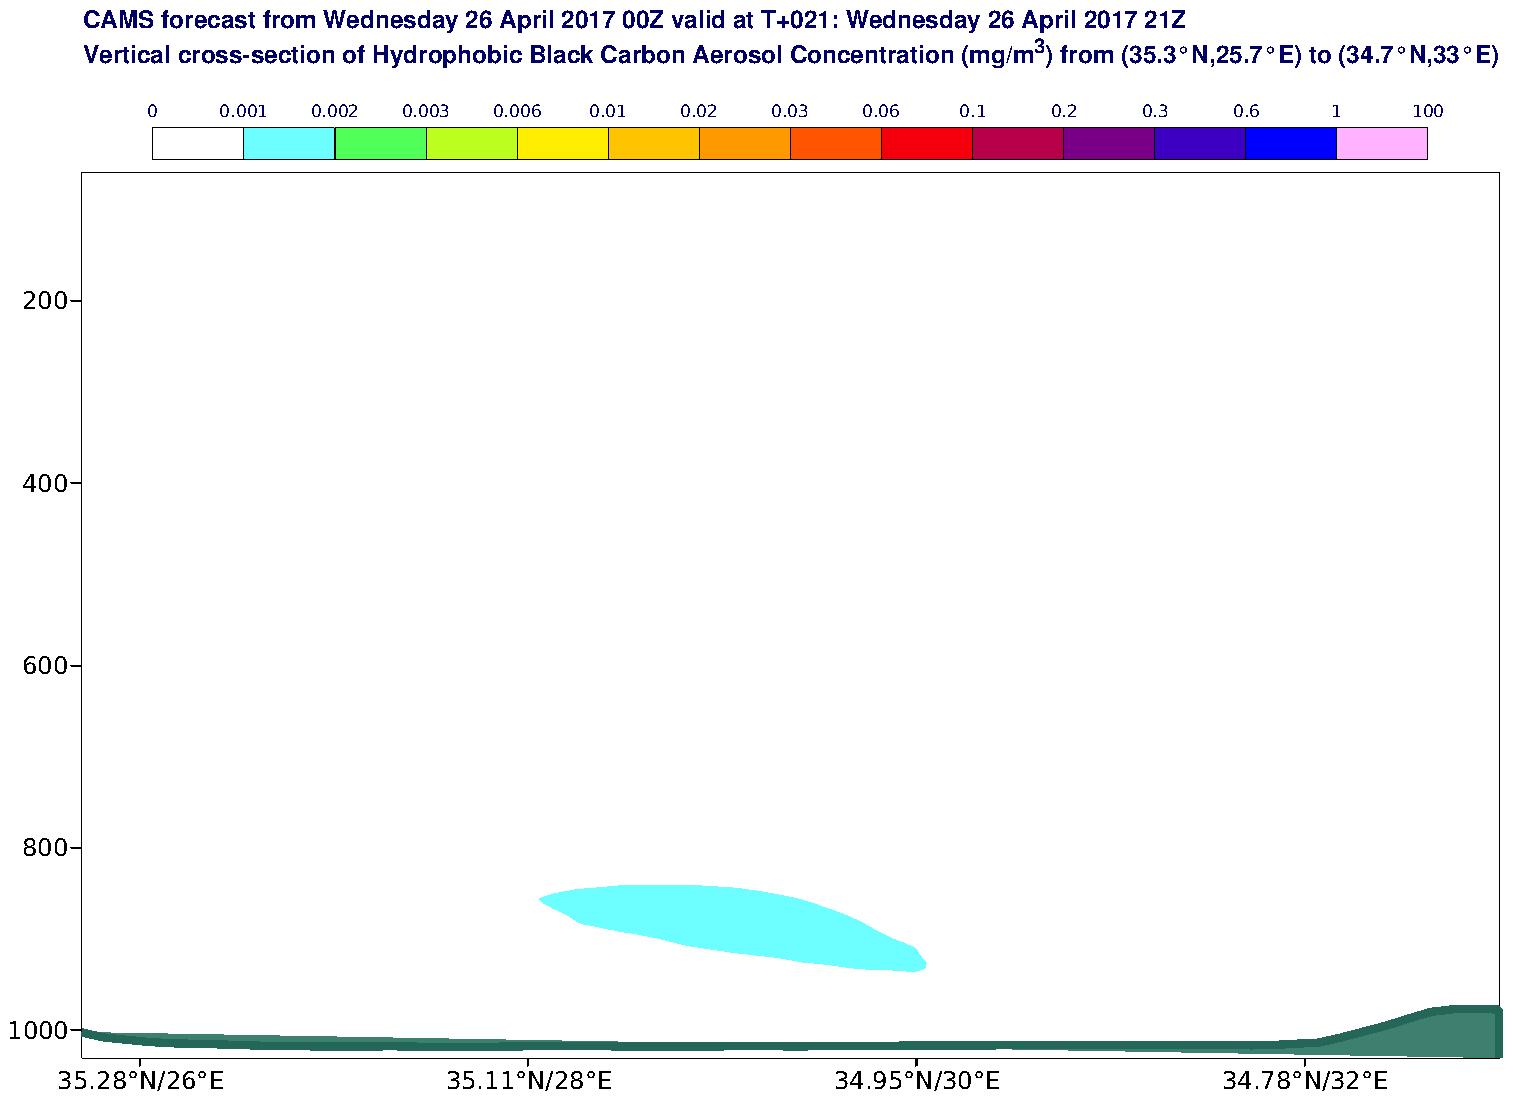 Vertical cross-section of Hydrophobic Black Carbon Aerosol Concentration (mg/m3) valid at T21 - 2017-04-26 21:00